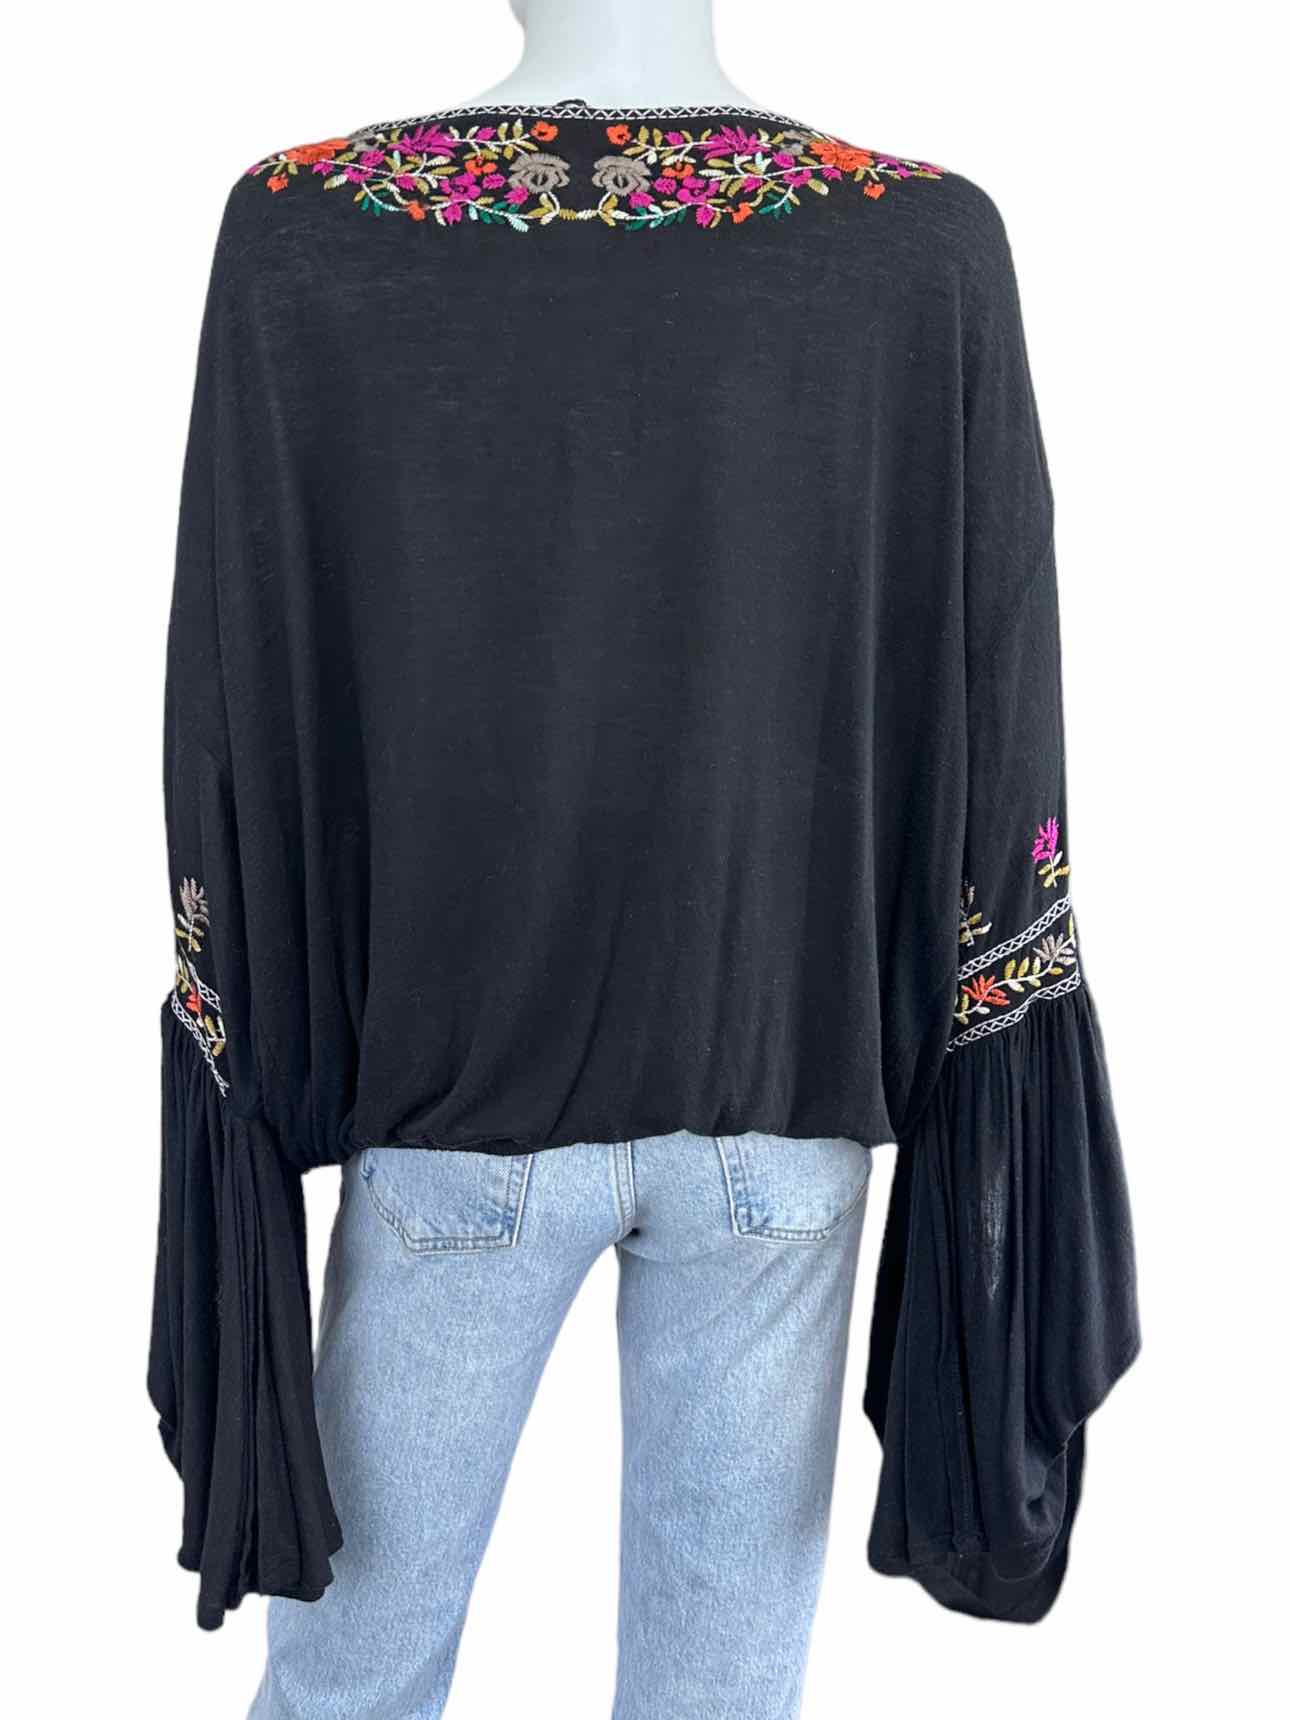 Free People Embroidered Blouse Size XS